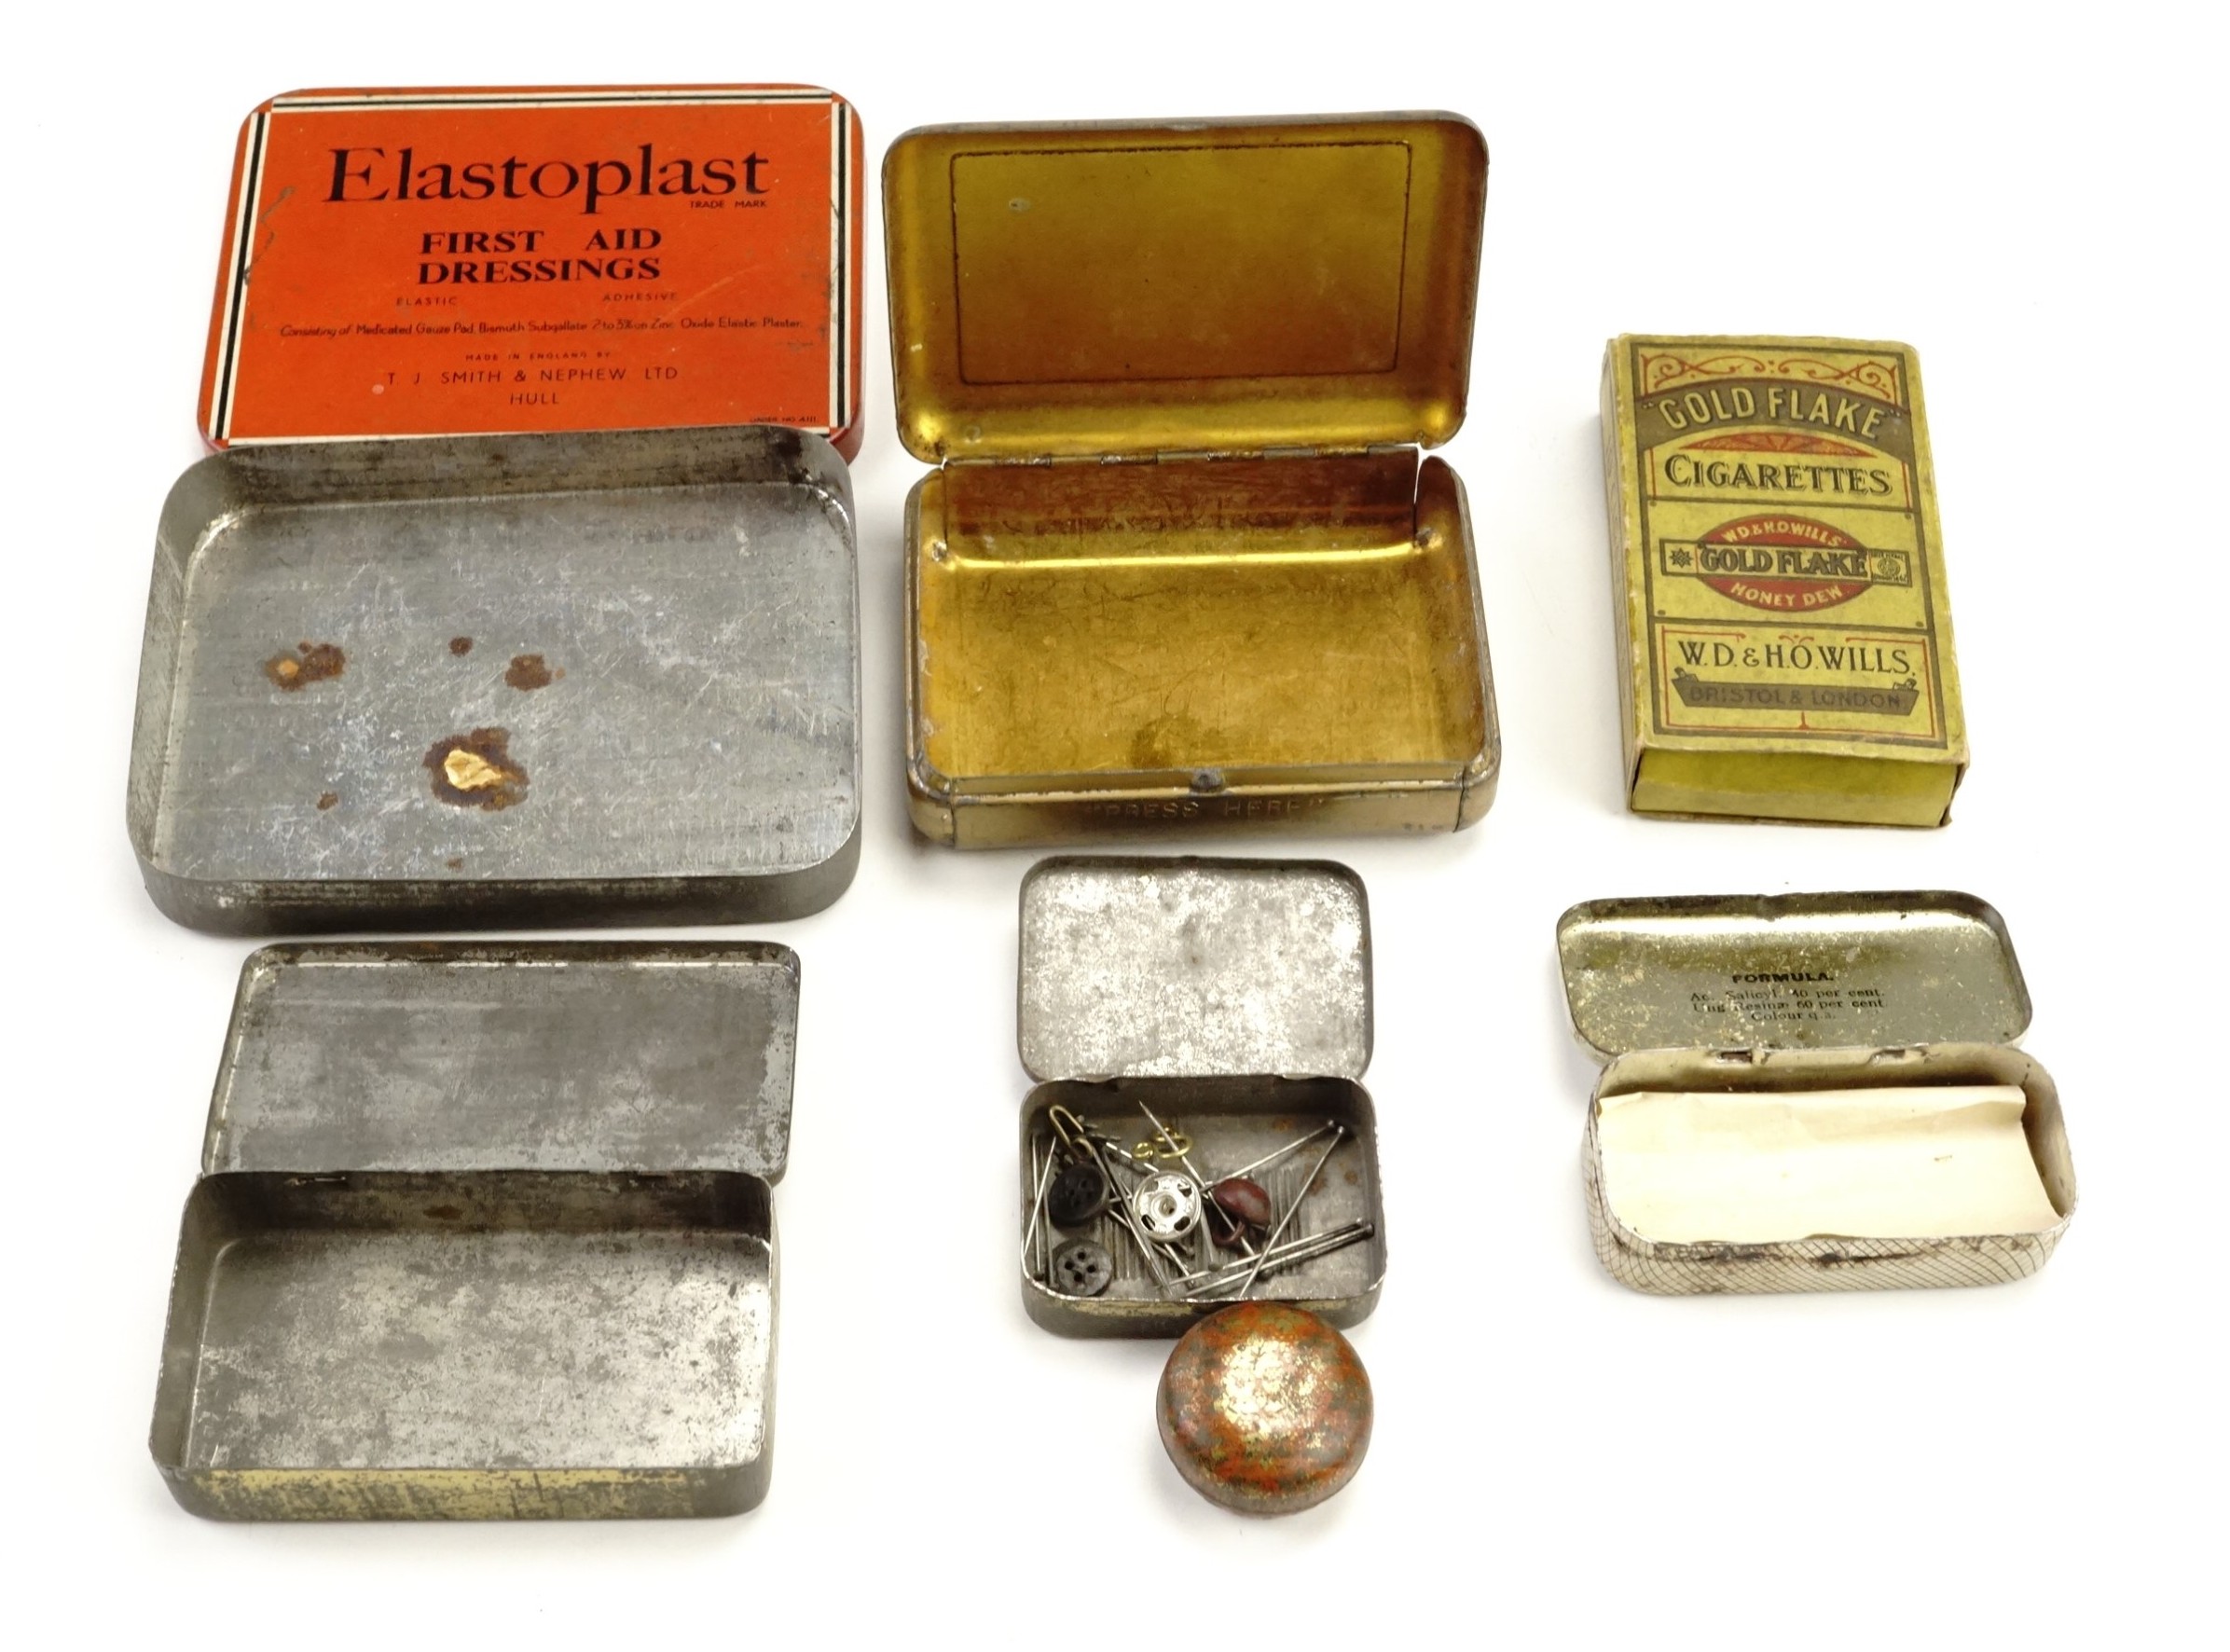 Six small vintage tins, and a cigarette box largest tin 10 x 8 x 1.5 cm - Image 3 of 3